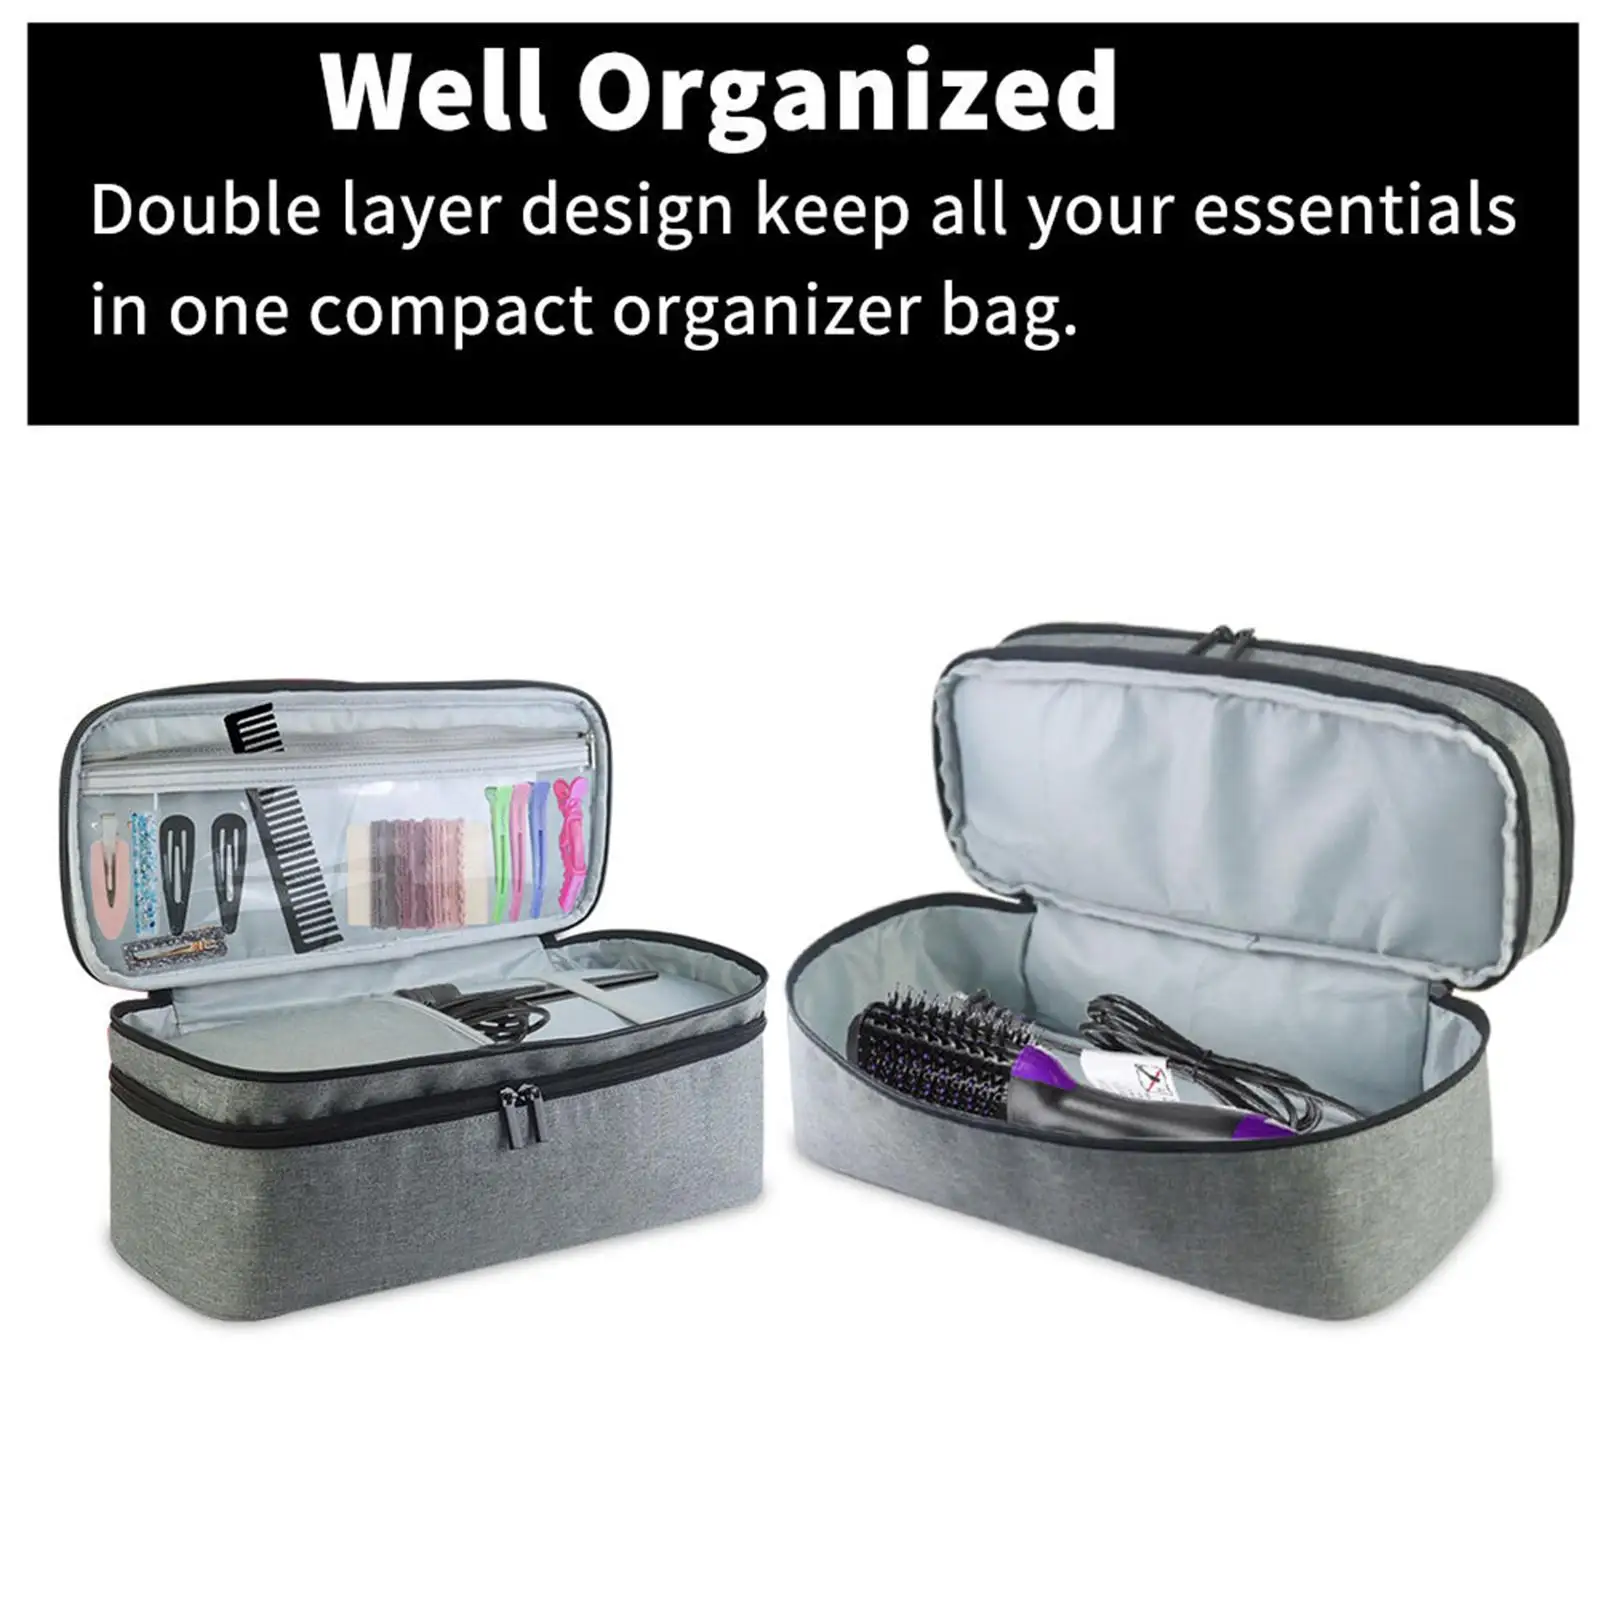 Double Layer Hair Dryer Bags Toiletry Bag Travel Case Bag Organizer Bag Dustproof Protection Bag for Home